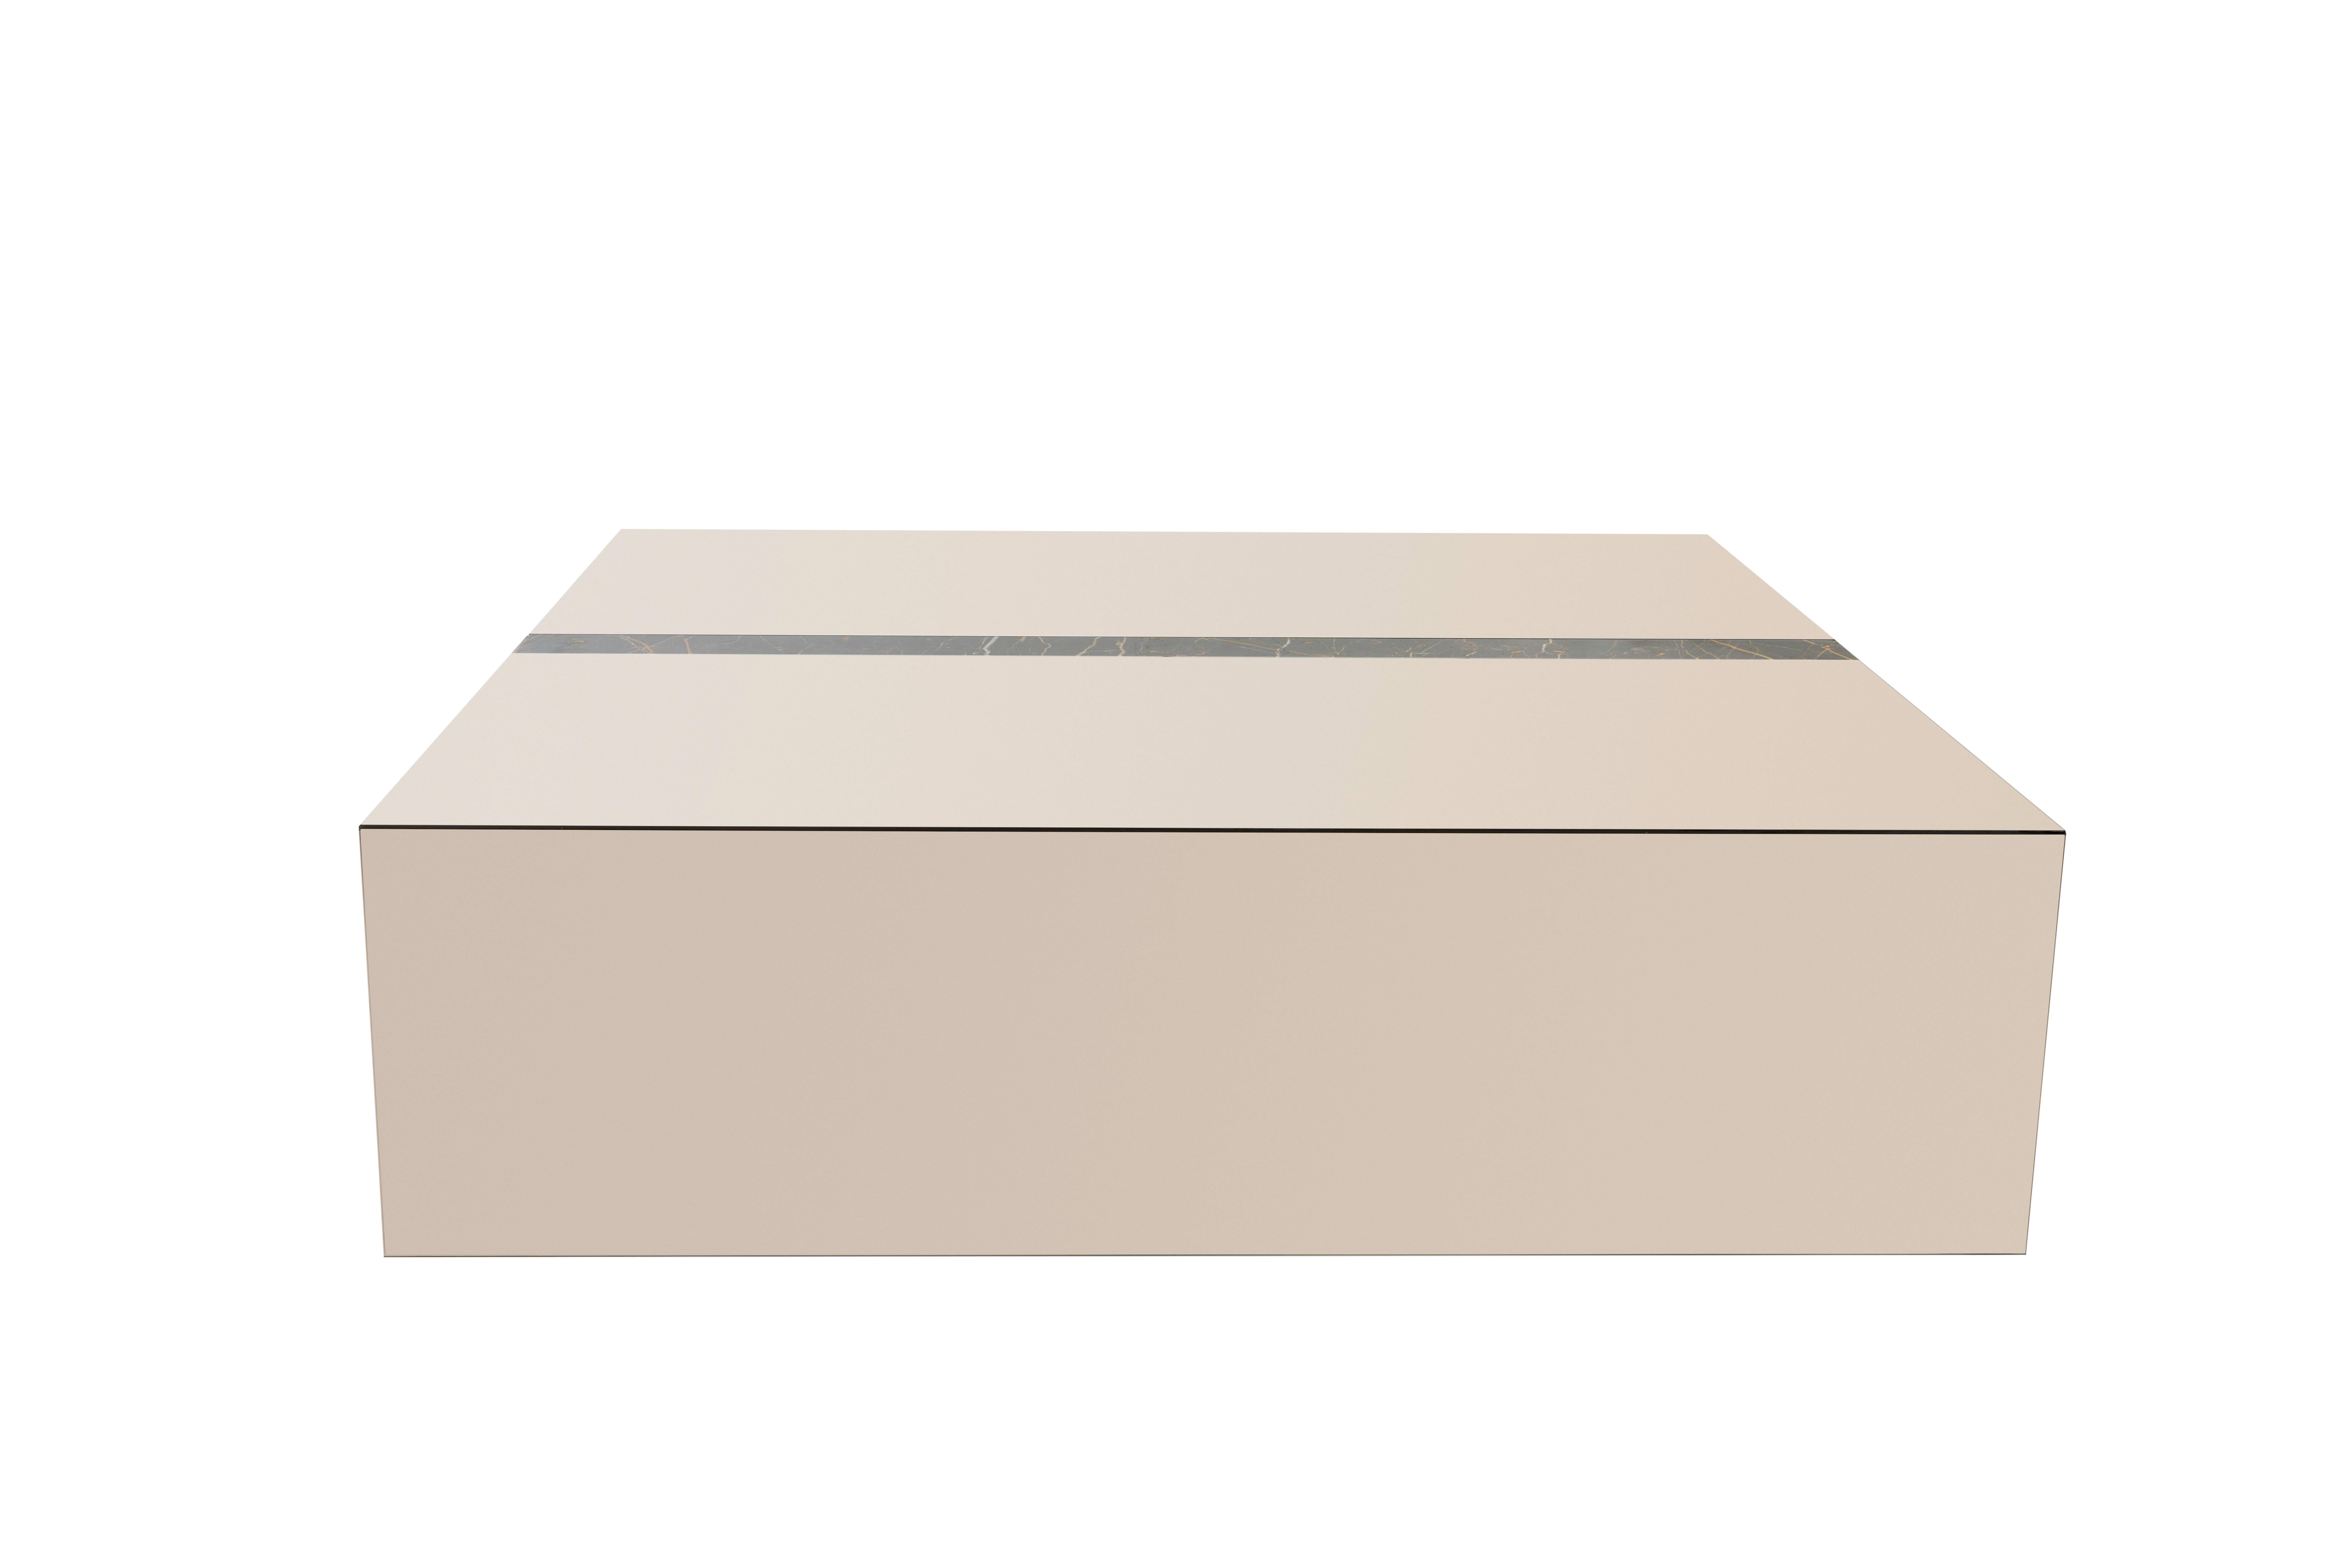 LEGADO is a coffee table made of mirror glass that combines with the natural stone detail.‎ Available in three different sizes, and is possible to customize Legado choosing any mirror and stone of Casa Magna collection.‎

Shown in bronze mirror and